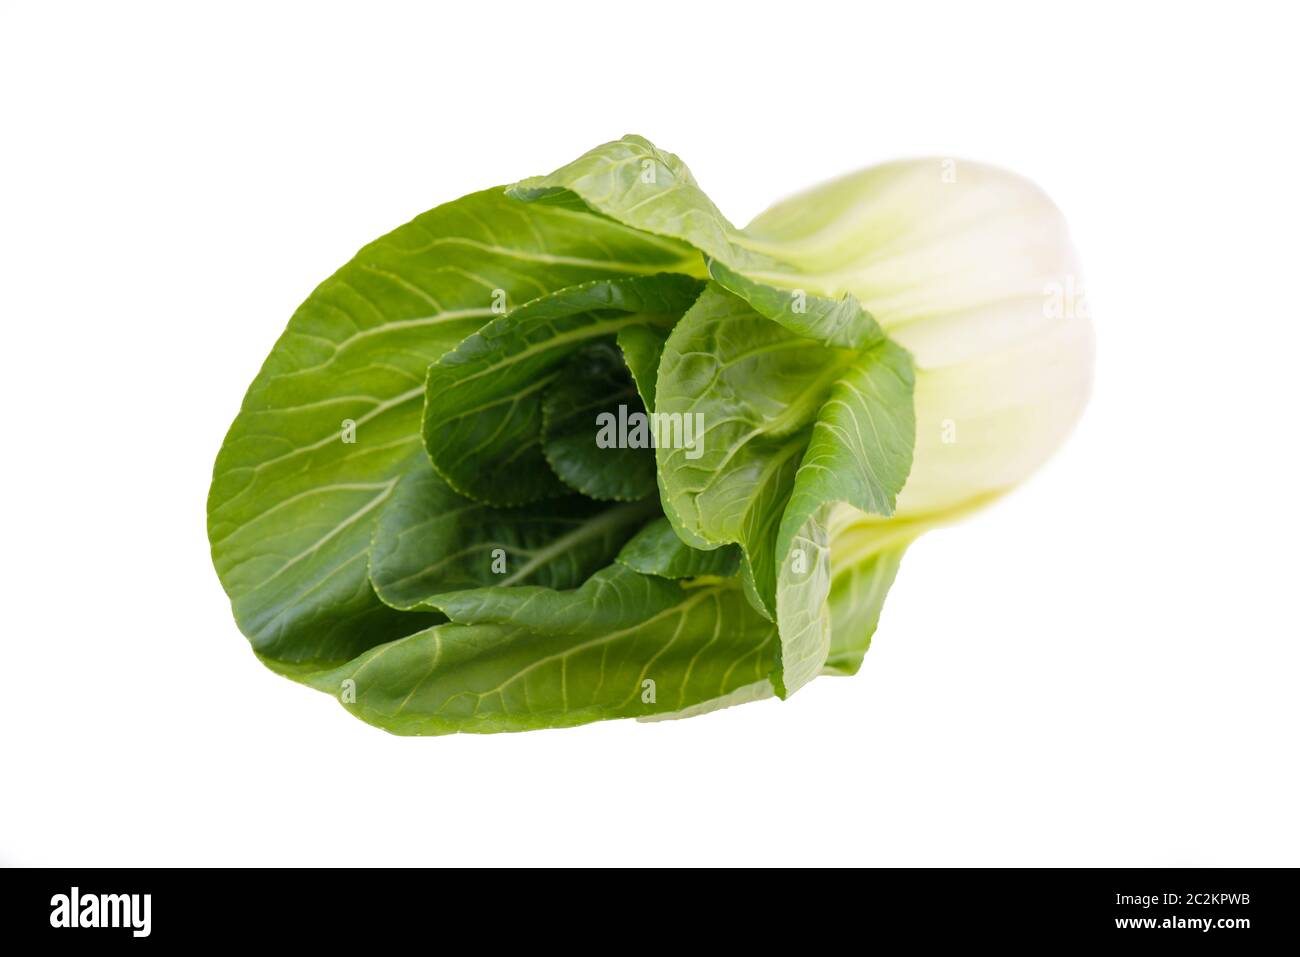 Pak choi vegetables isolated on a white background Stock Photo